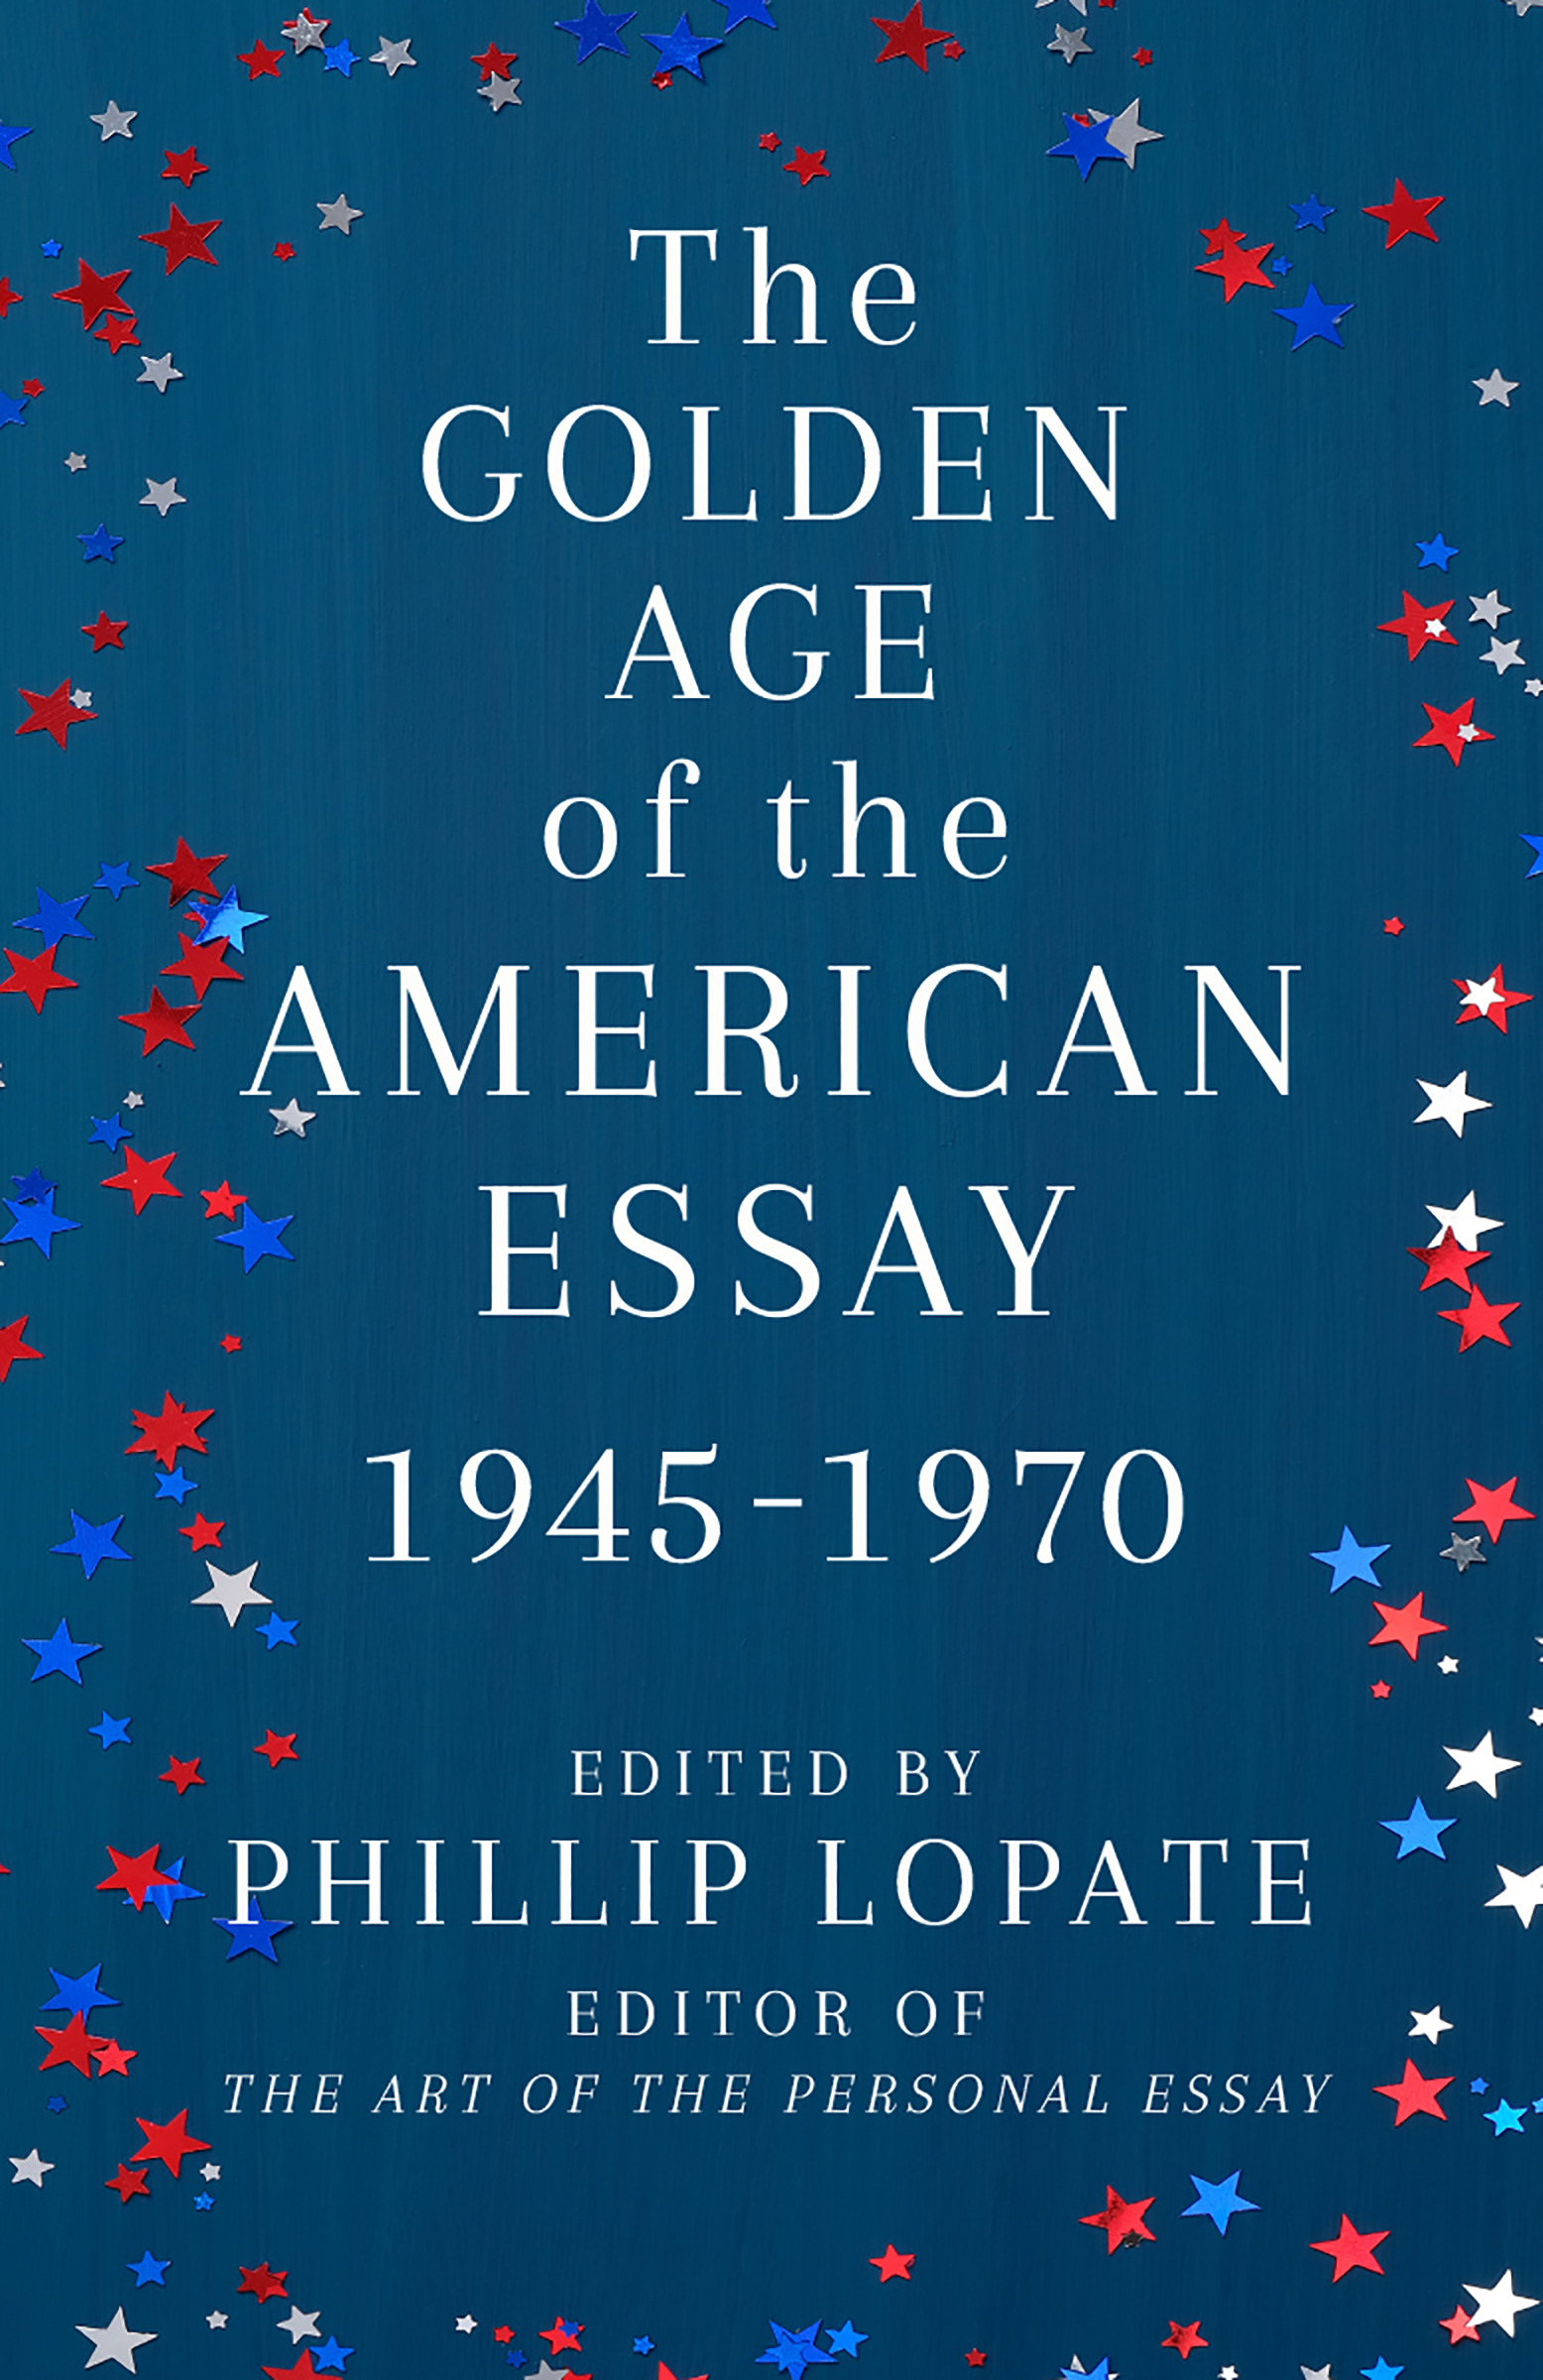 Virtual Book Launch: The Golden Age of the American Essay by Phillip Lopate in conversation with Clifford Thompson